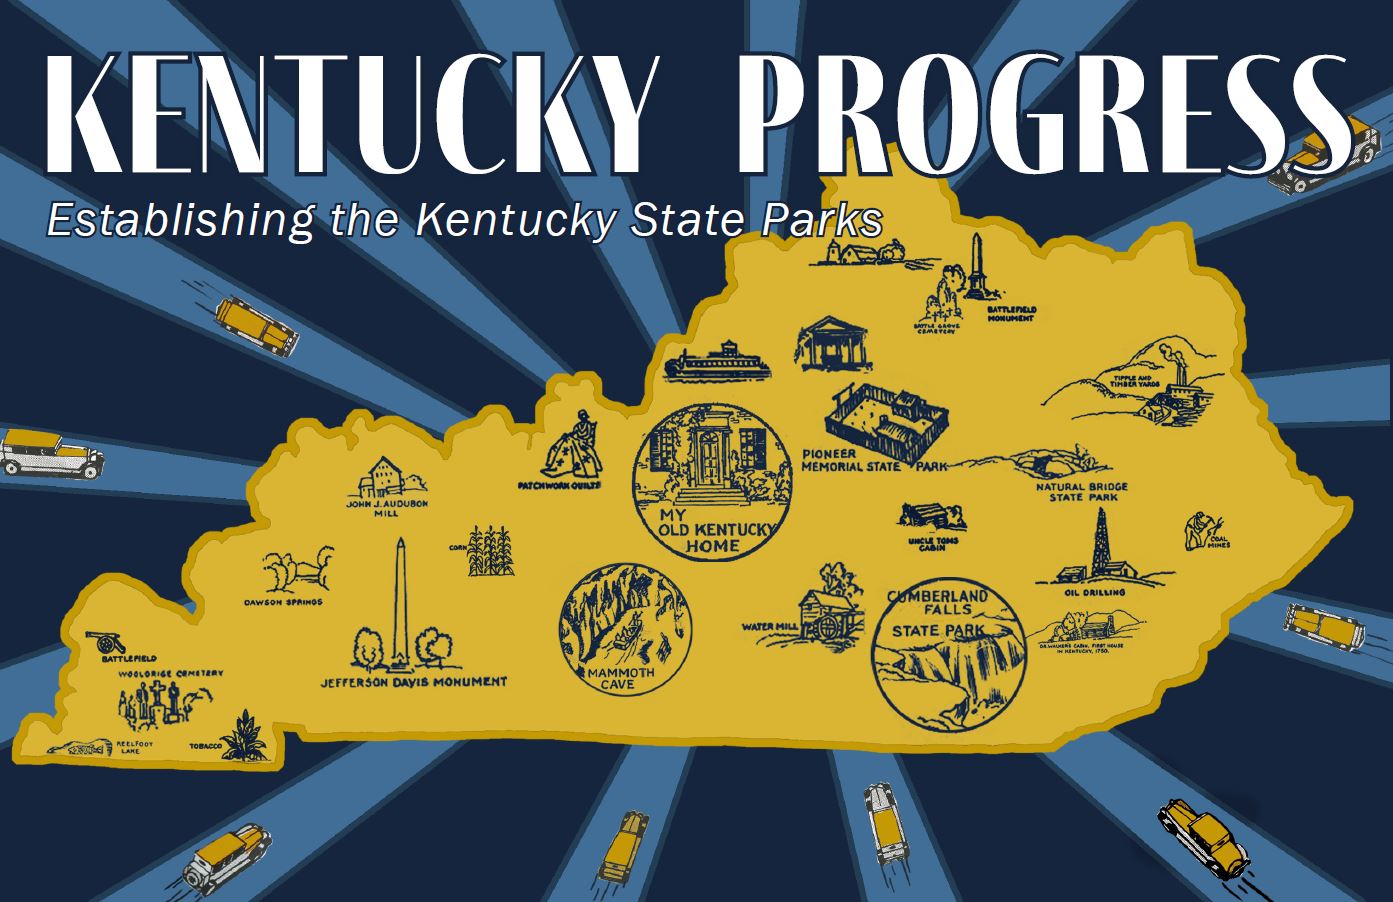 Outline of the state of Kentucky with locations of state parks on it. Writing reads: 